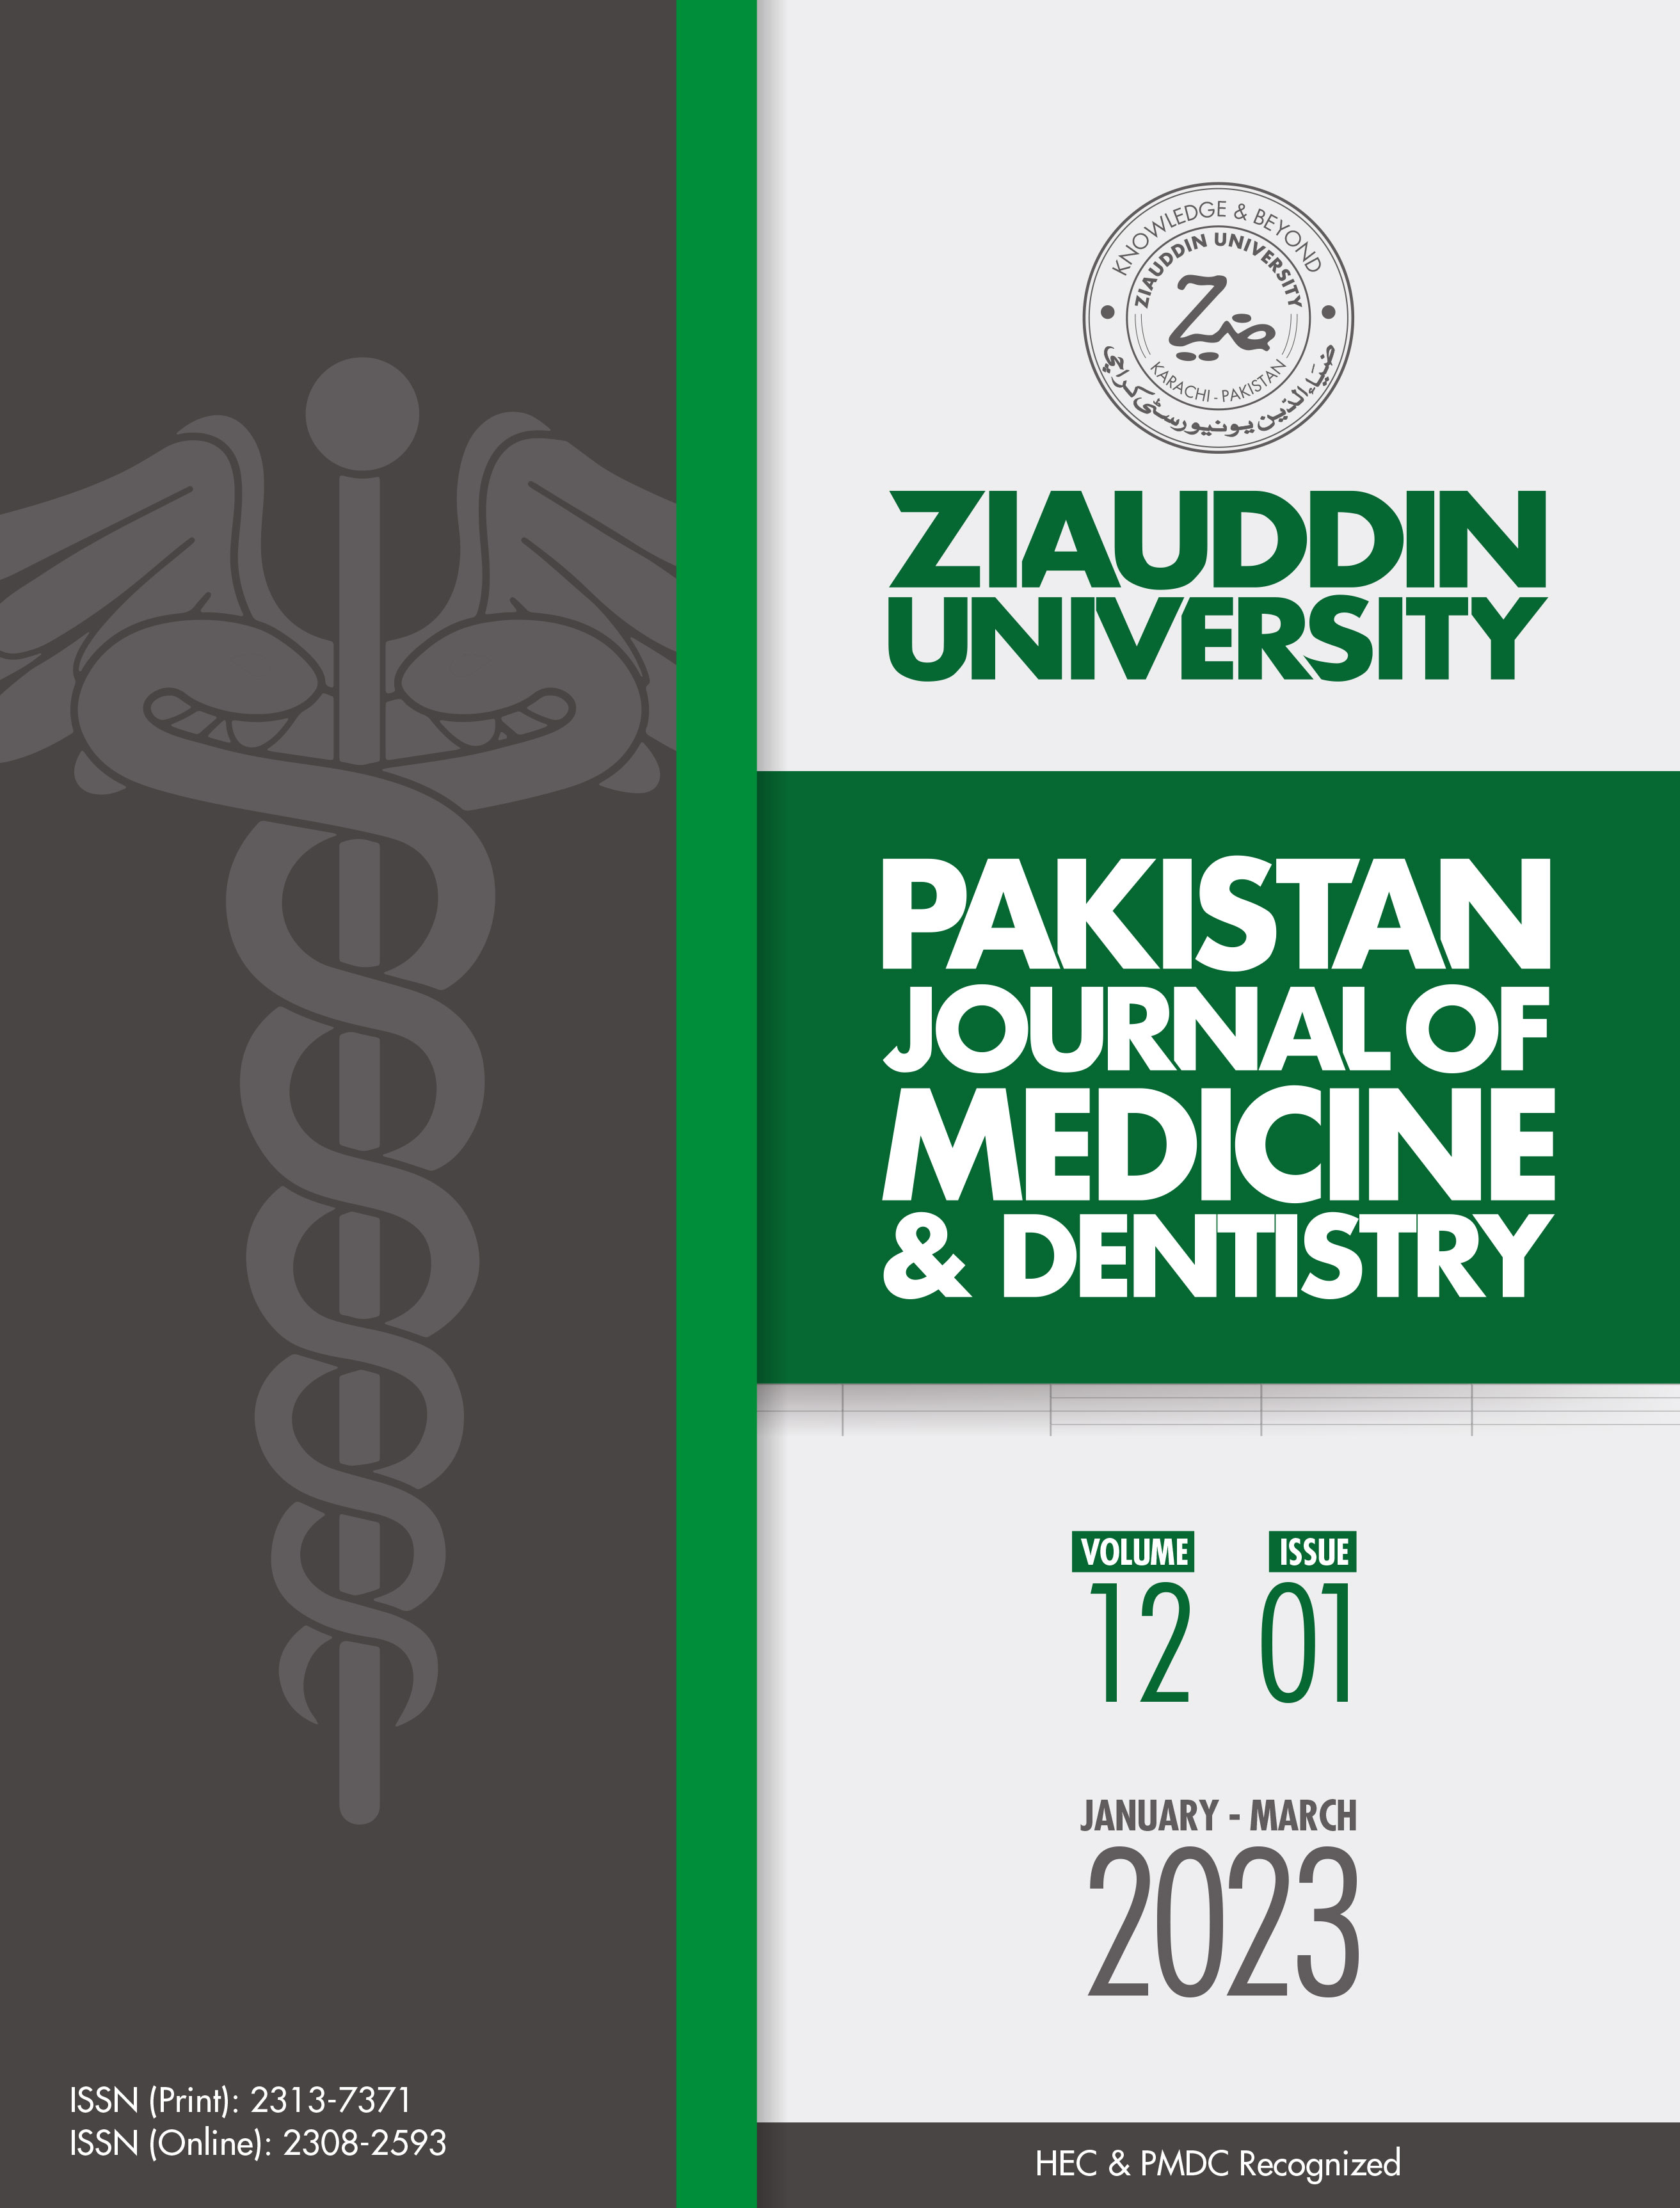 					View PJMD Volume 12, Issue 1, January - March 2023
				